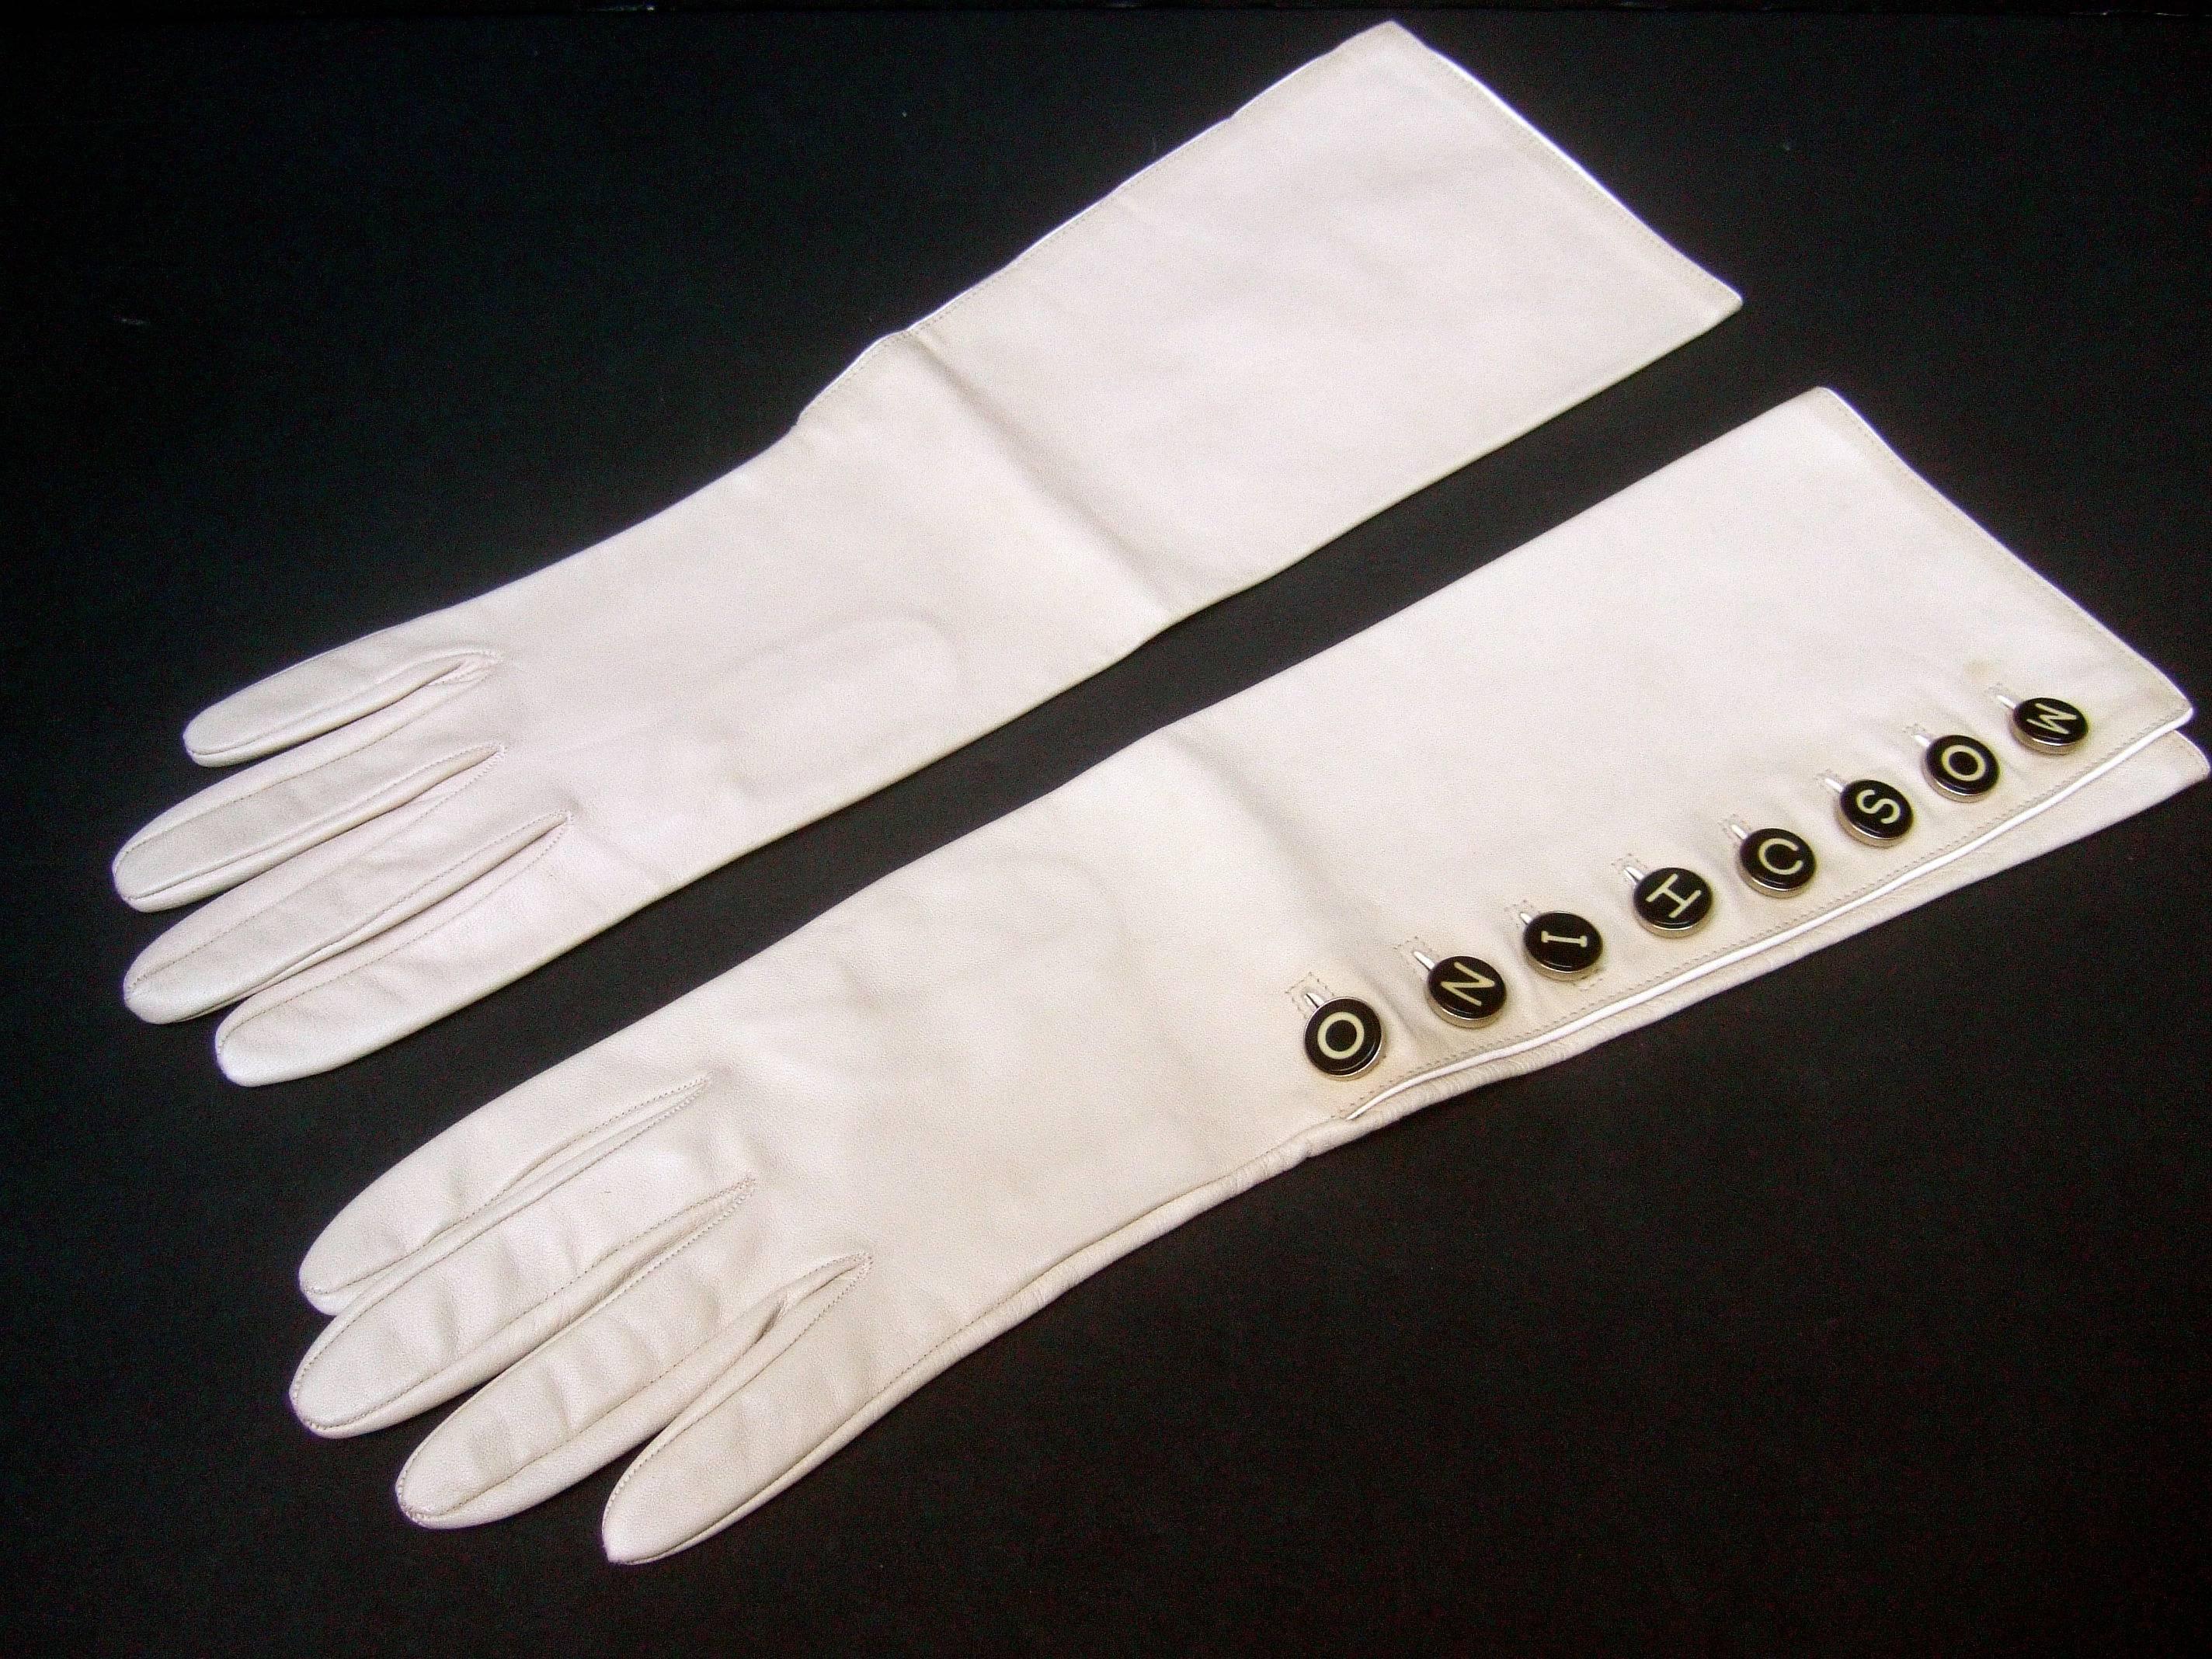 Moschino Chic ivory leather kidskin gloves c 1990s
The Italian leather gloves are designed
with a row of typewriter key style buttons 
on one glove that spells Moschino 

The supple bone color leather elbow length gloves 
are buttery soft &